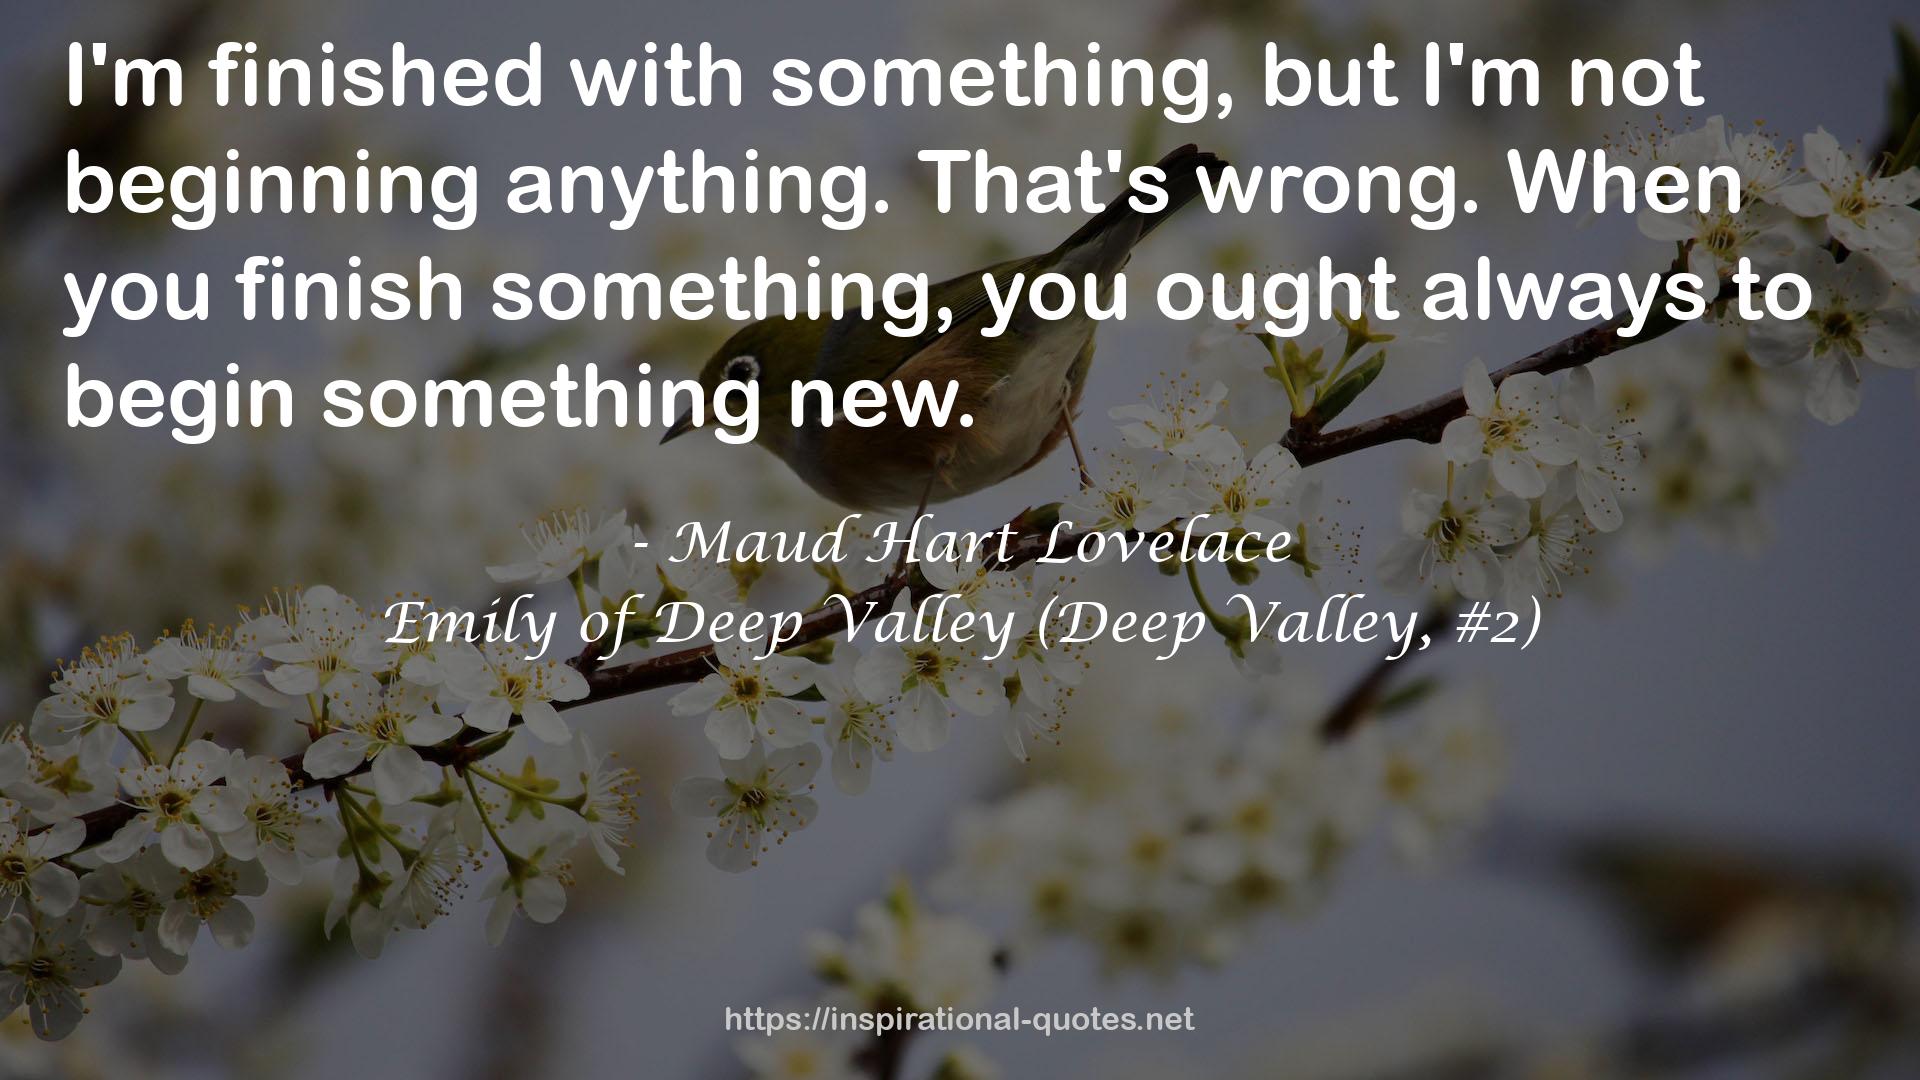 Emily of Deep Valley (Deep Valley, #2) QUOTES